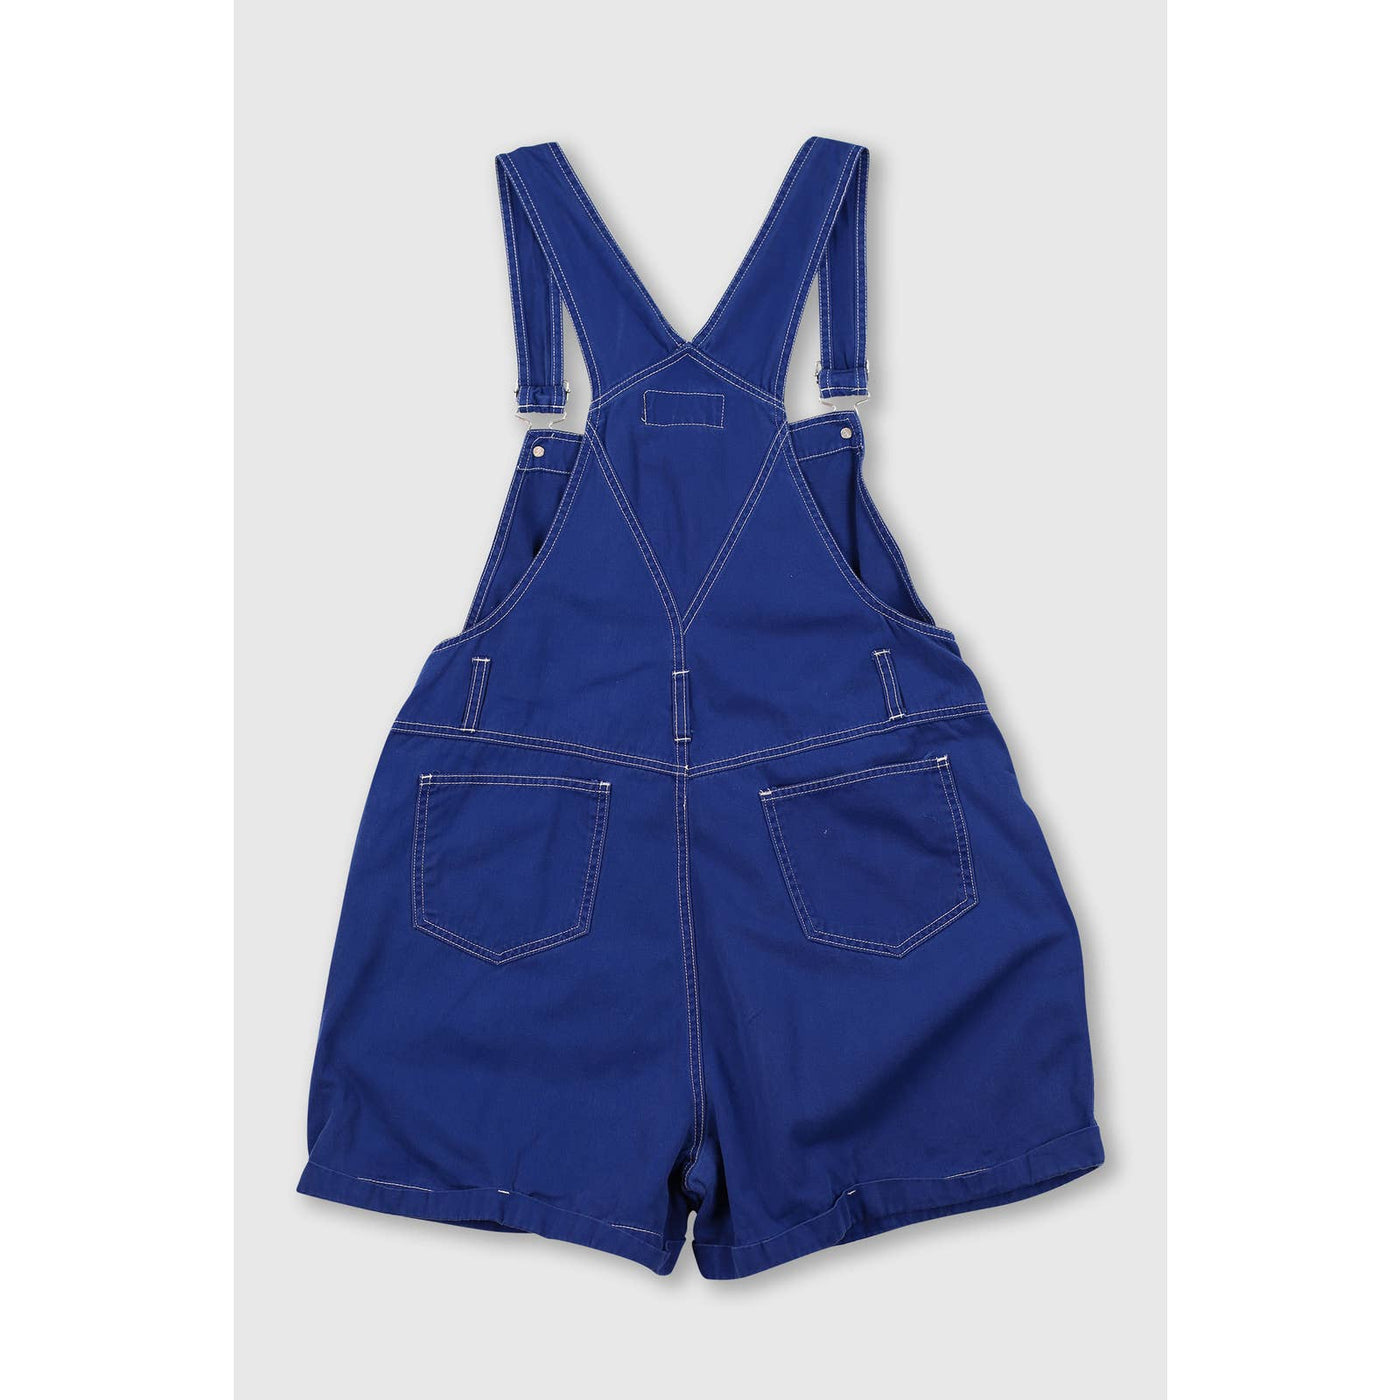 Vintage 90’s Bright Blue Overall Shorts